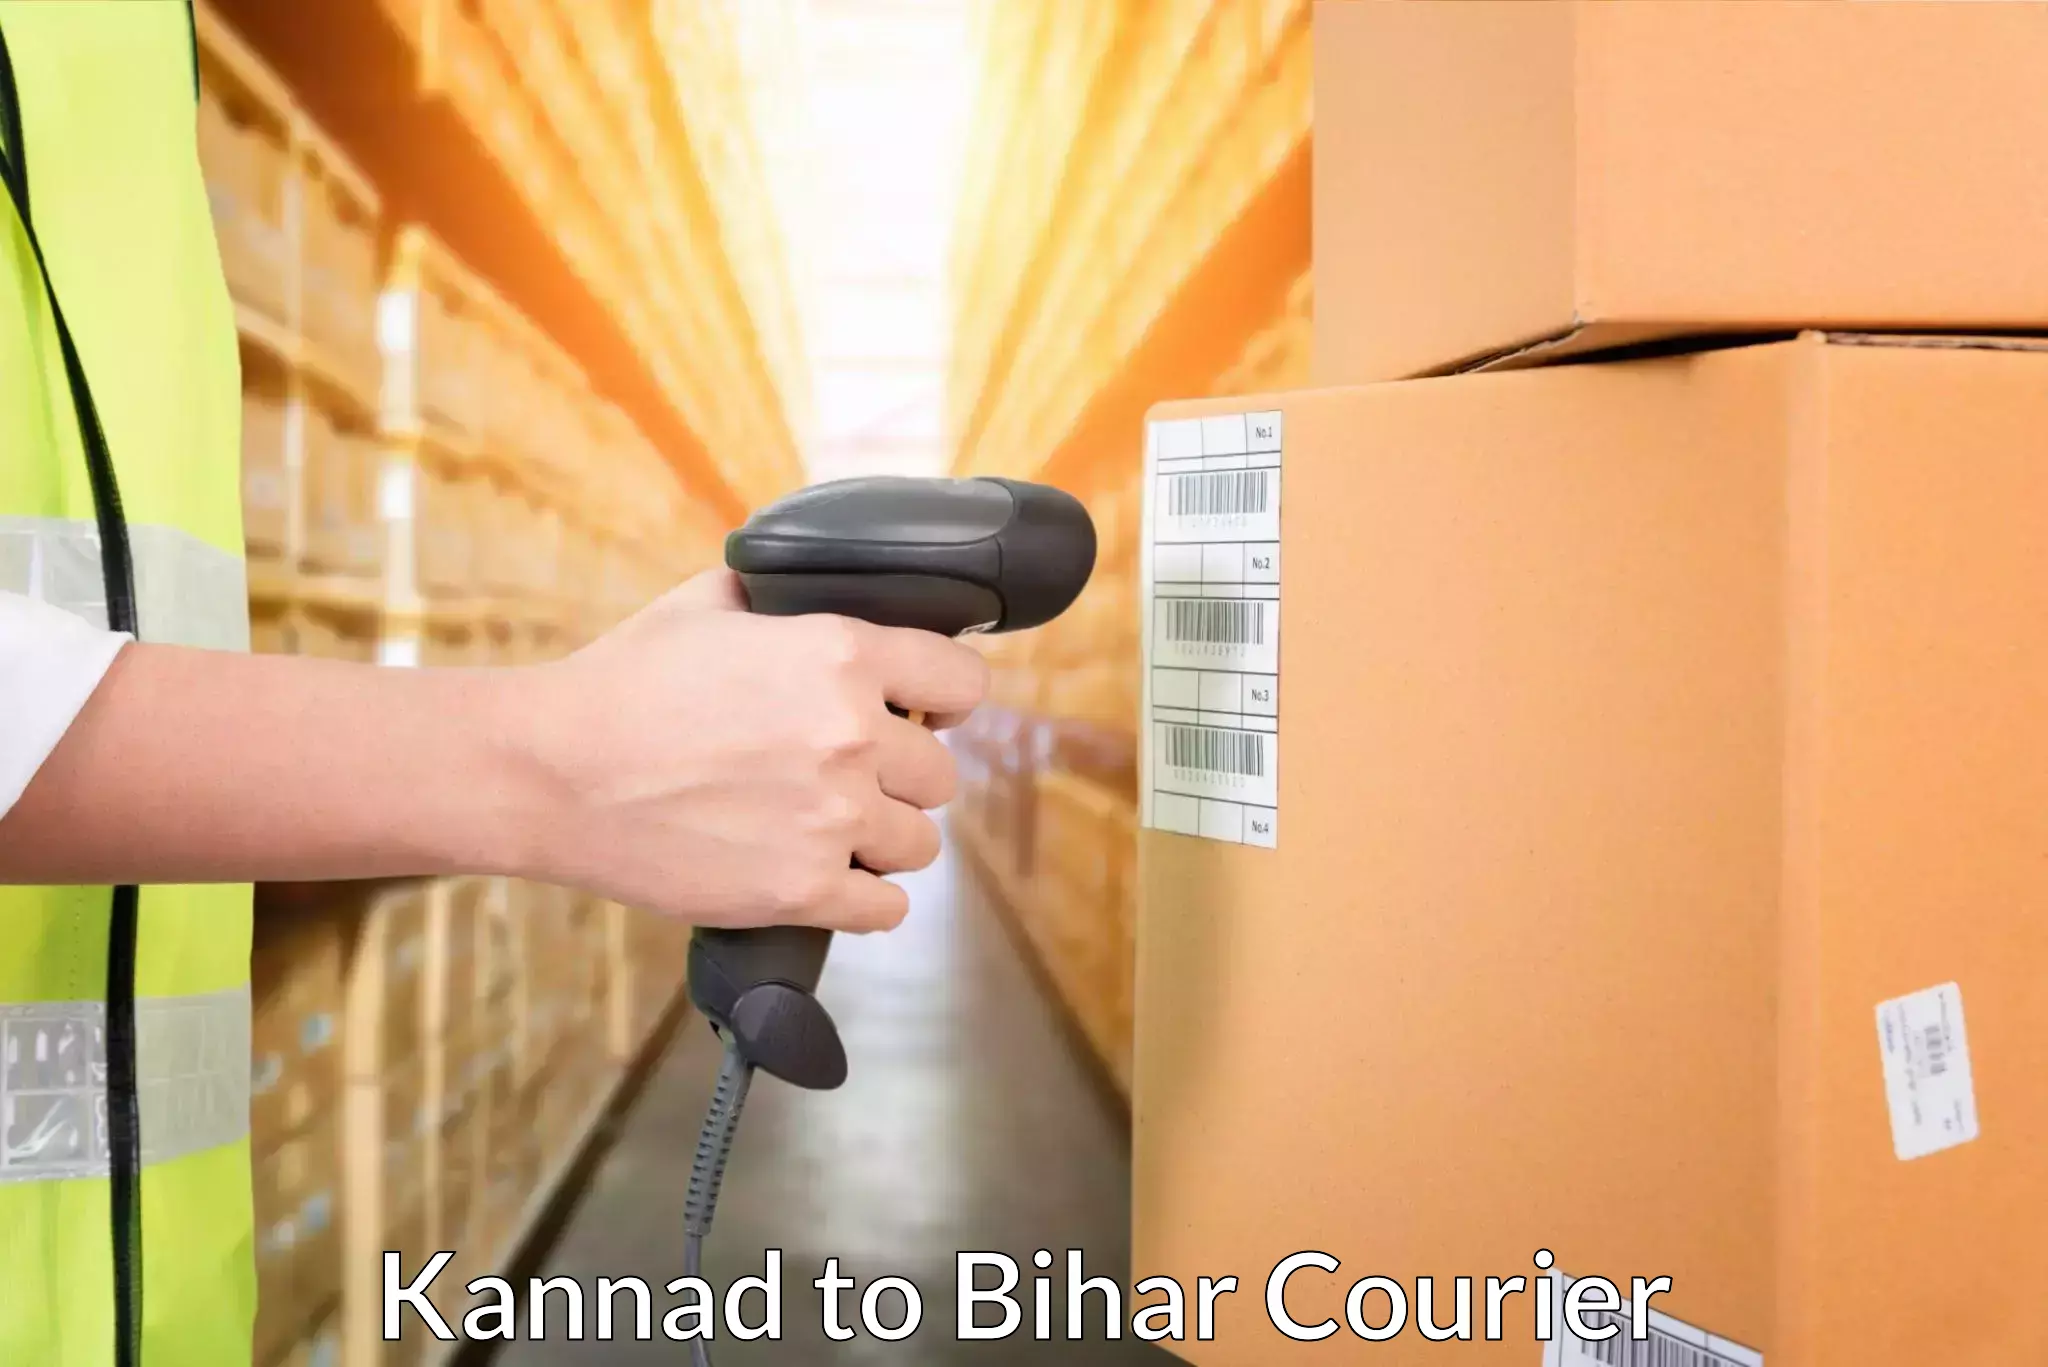 Courier service comparison Kannad to Chakia